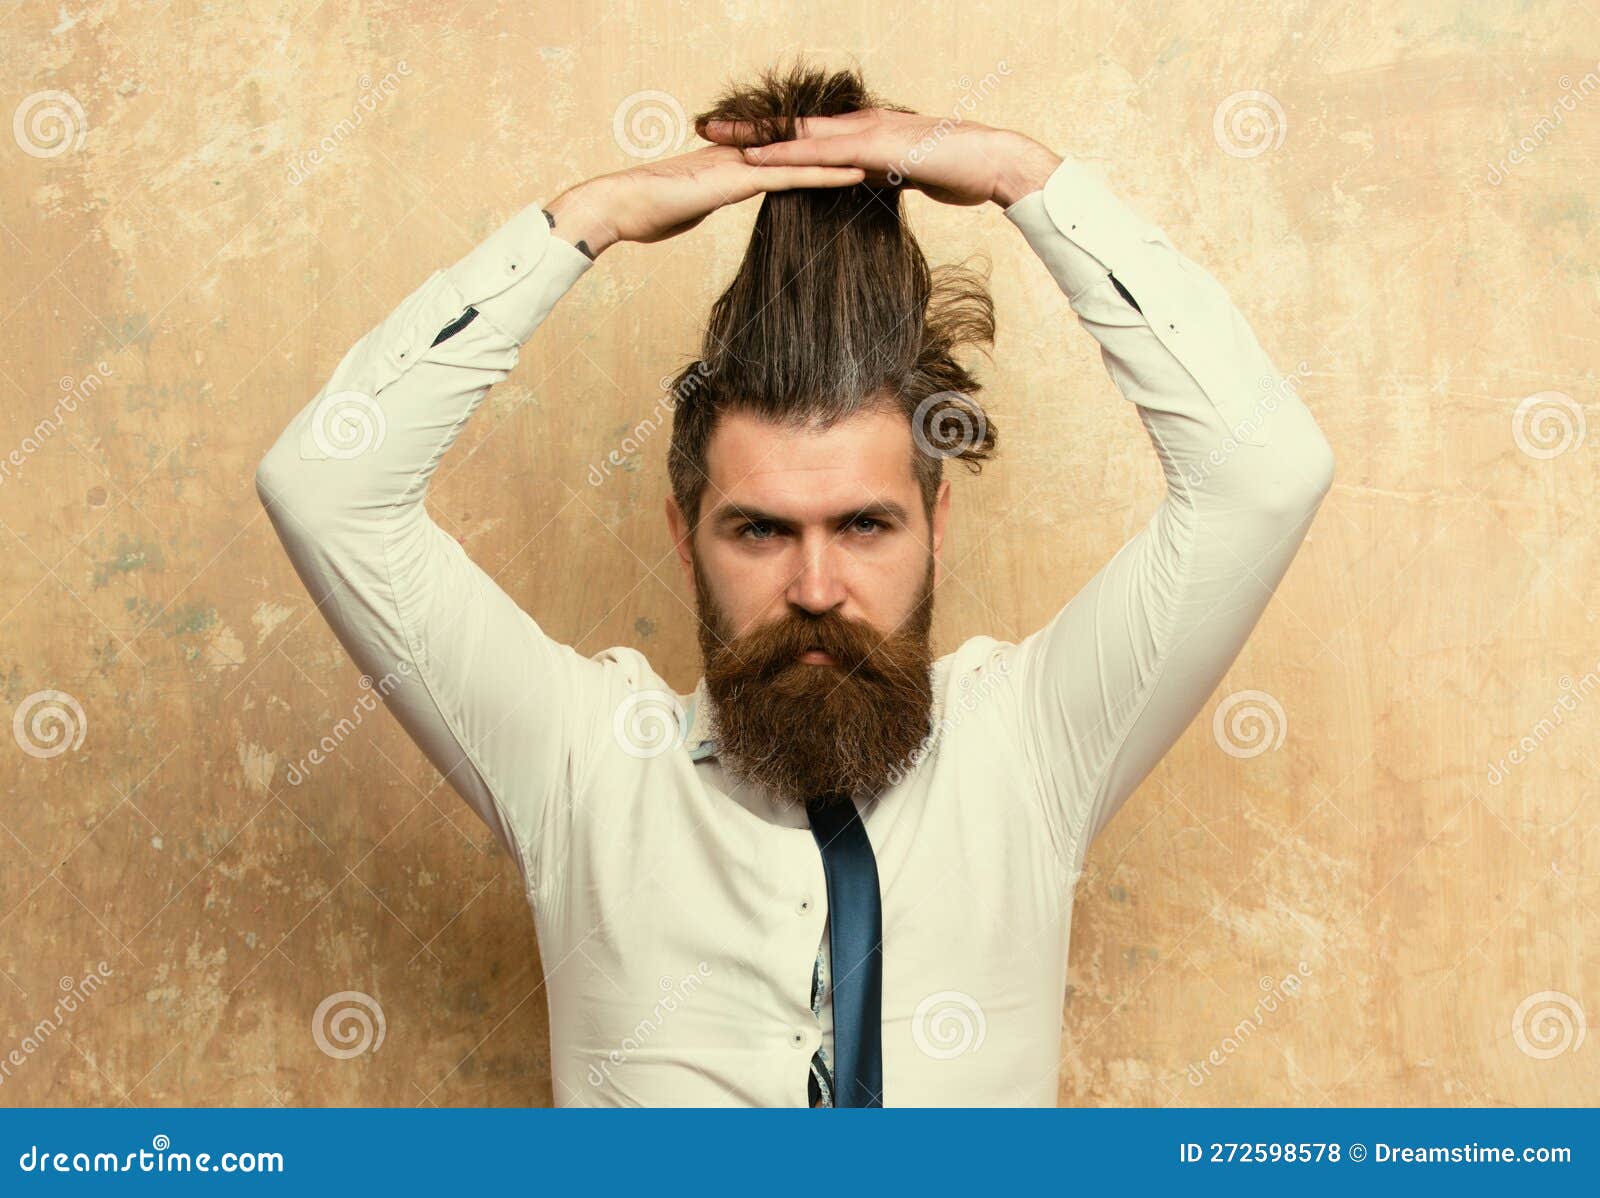 Man Bun and Beard: 17 Combos We're Kinda Obsessed With | All Things Hair US